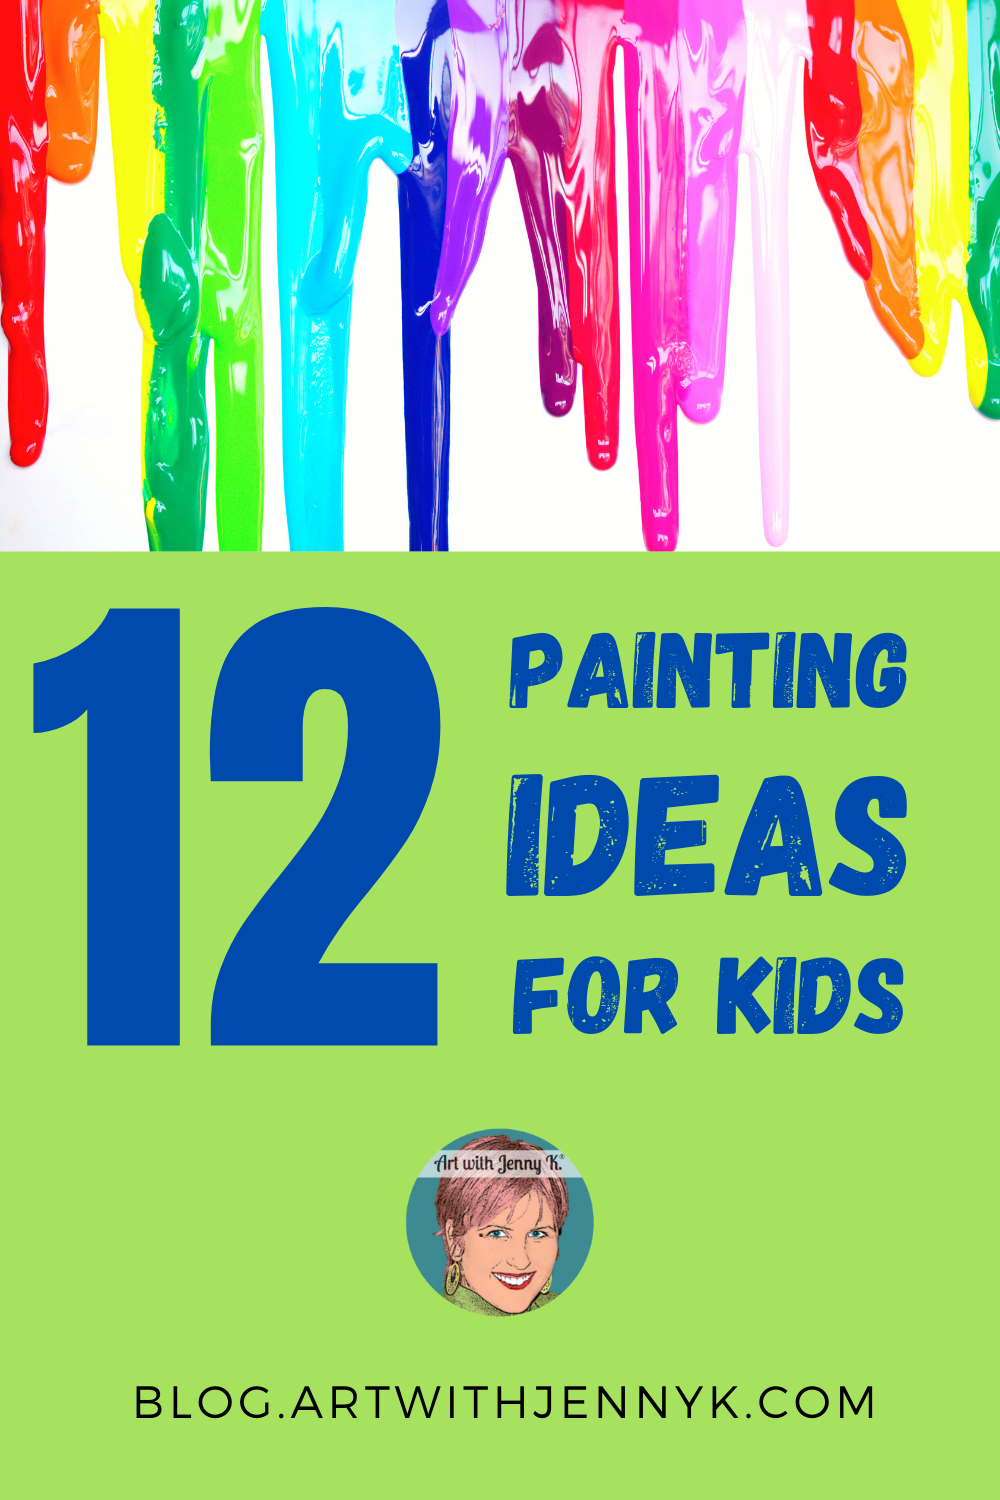 12 Easy Painting Ideas for Kids - Art With Jenny K.